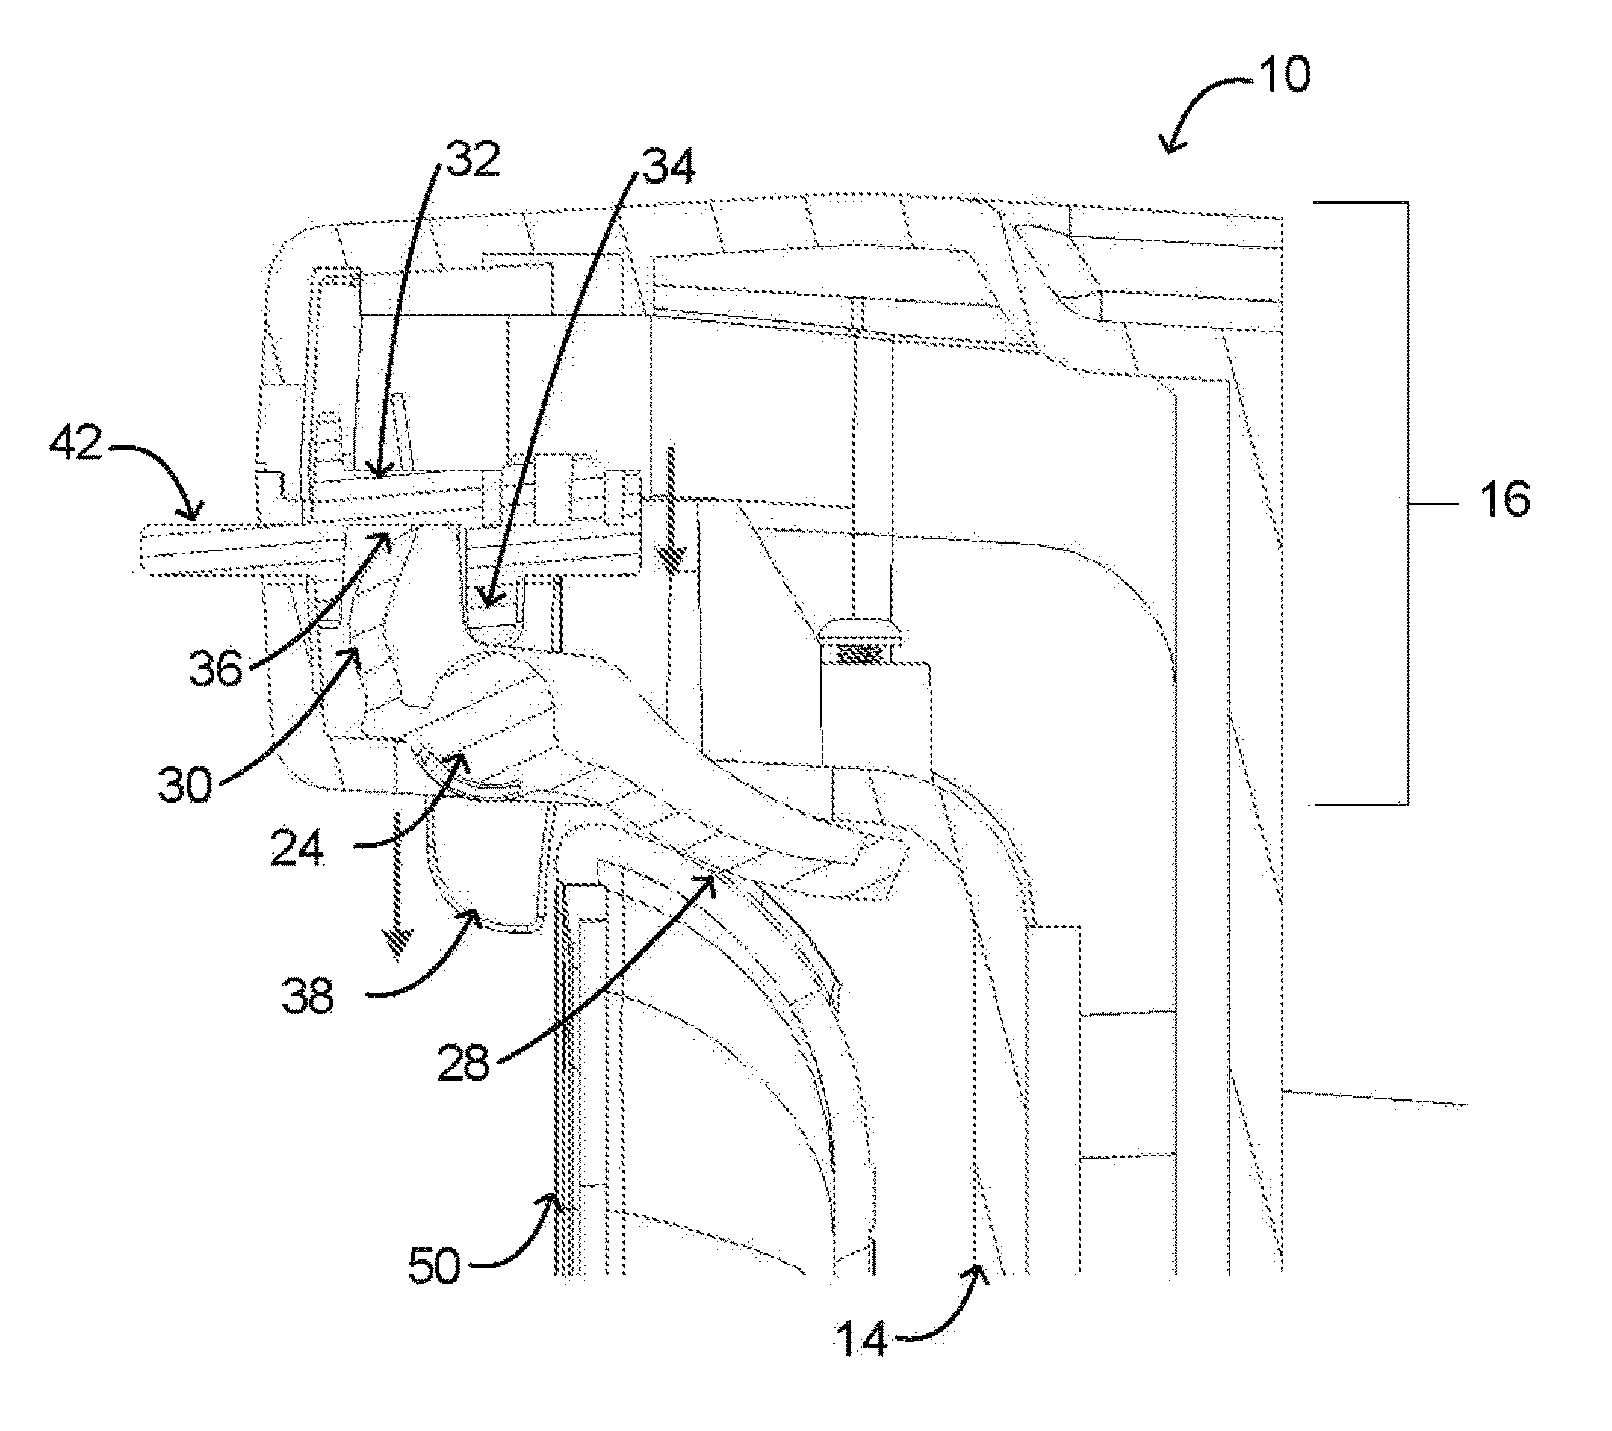 Docking station with improved latching mechanism